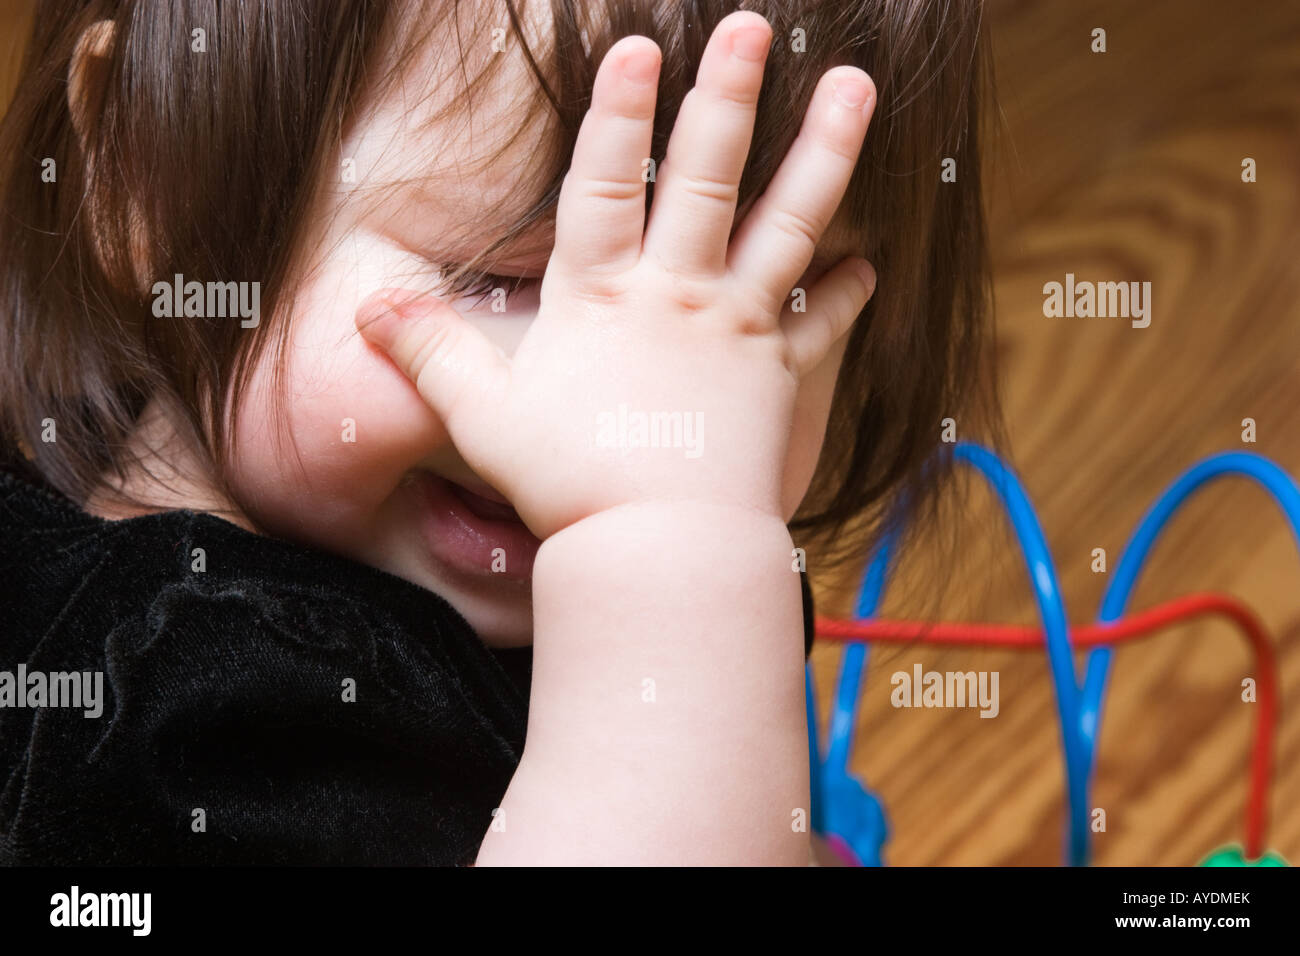 Nine month old baby girl crying Stock Photo